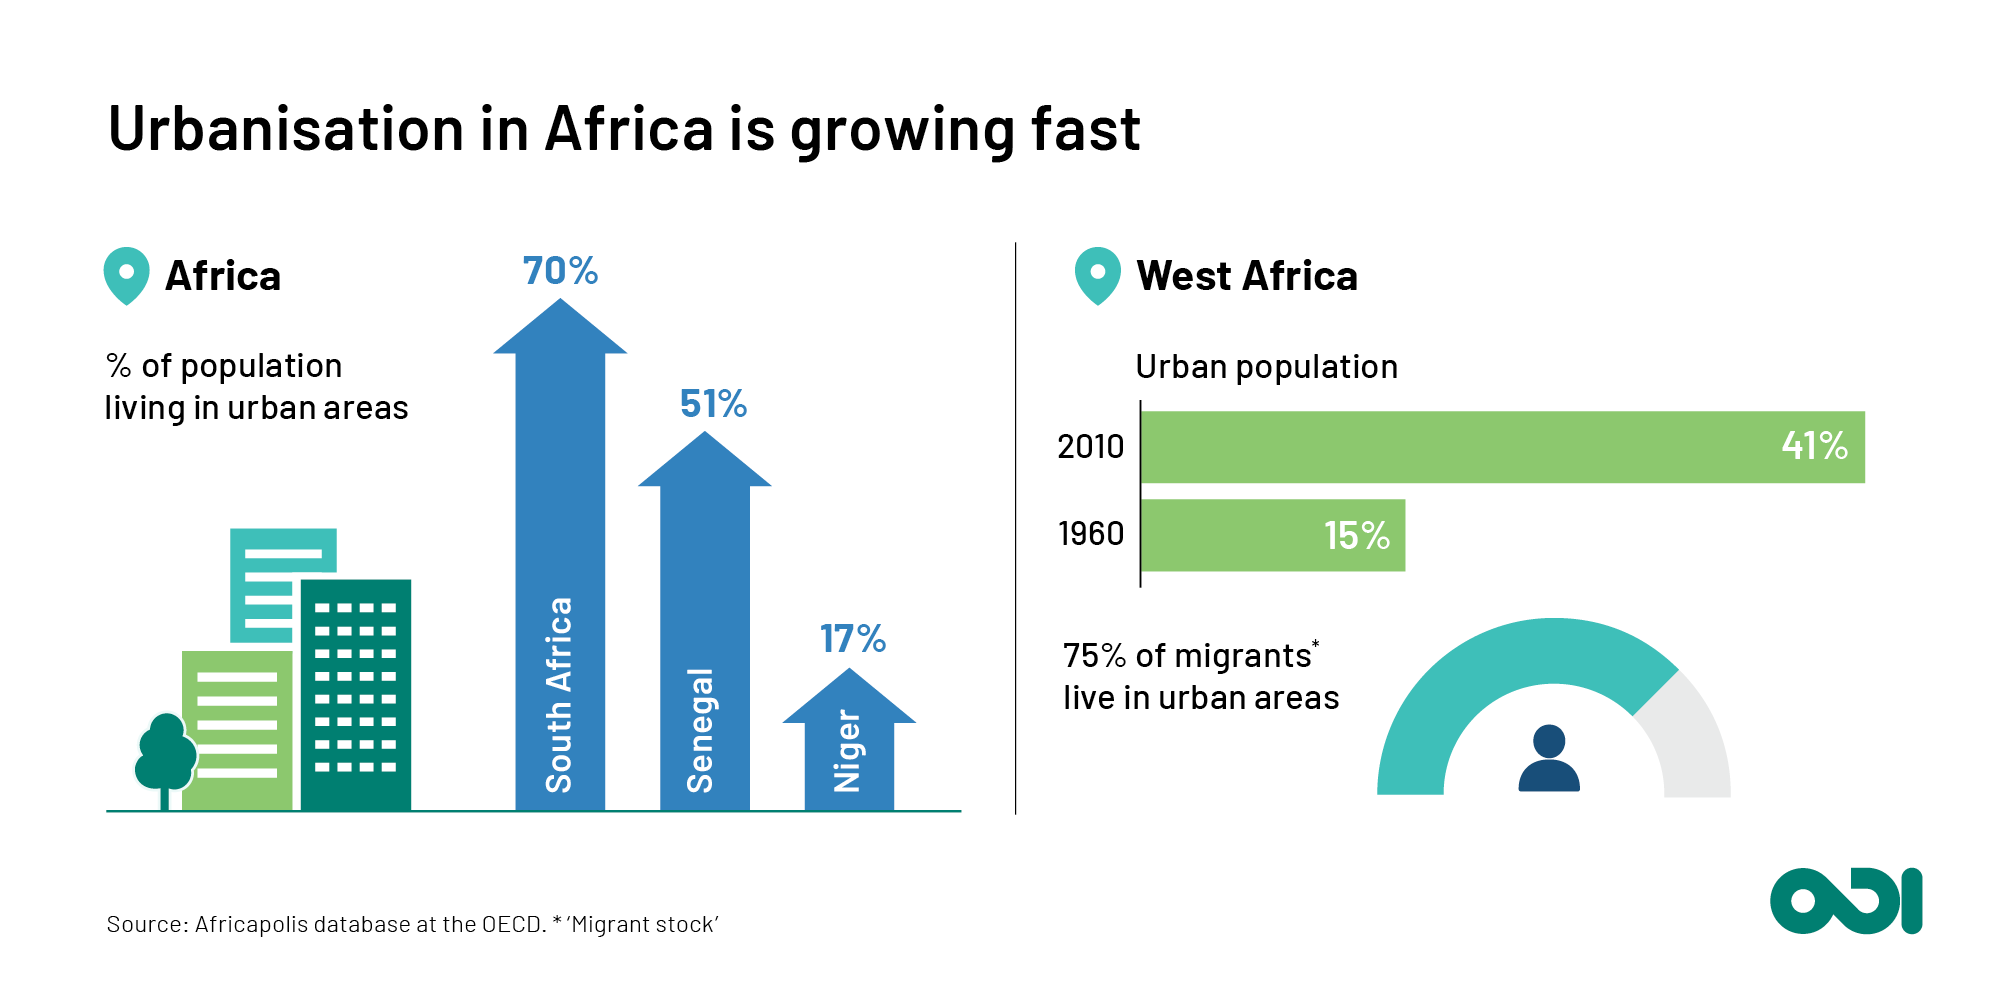 Urbanisation in Africa is growing fast